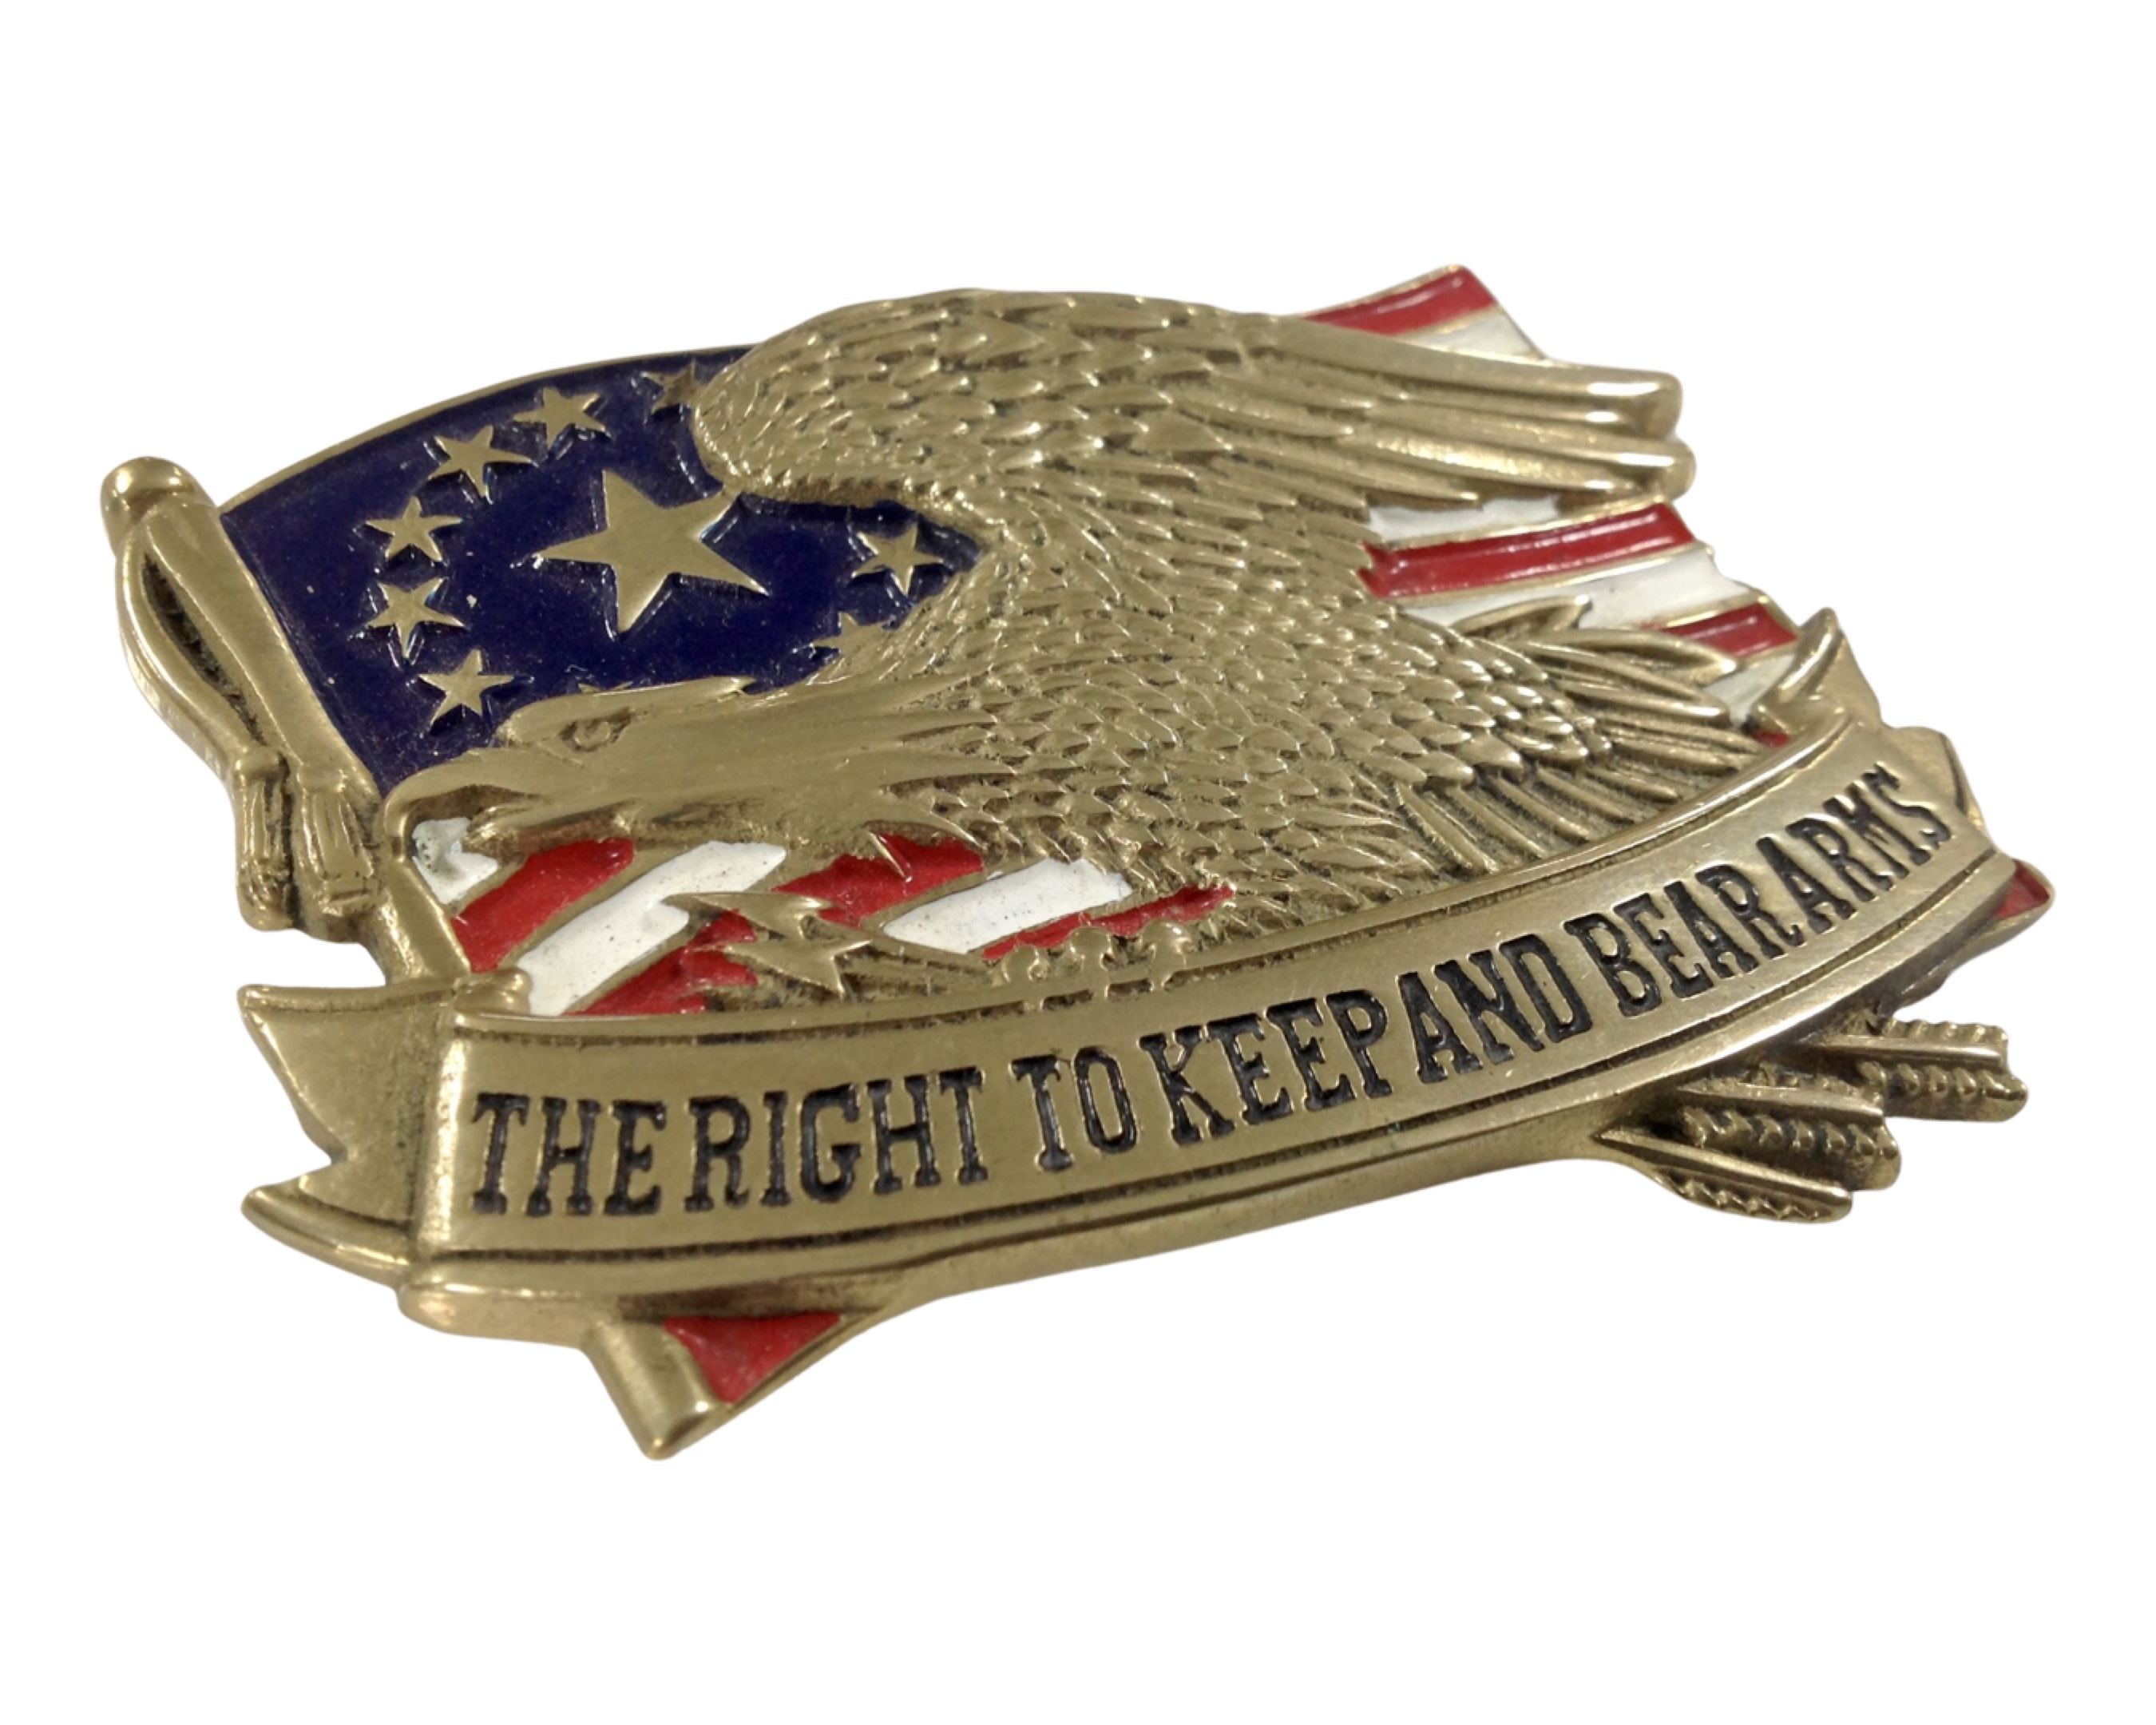 An American 2nd amendment 'The Right to Keep and Bear Arms' belt buckle.